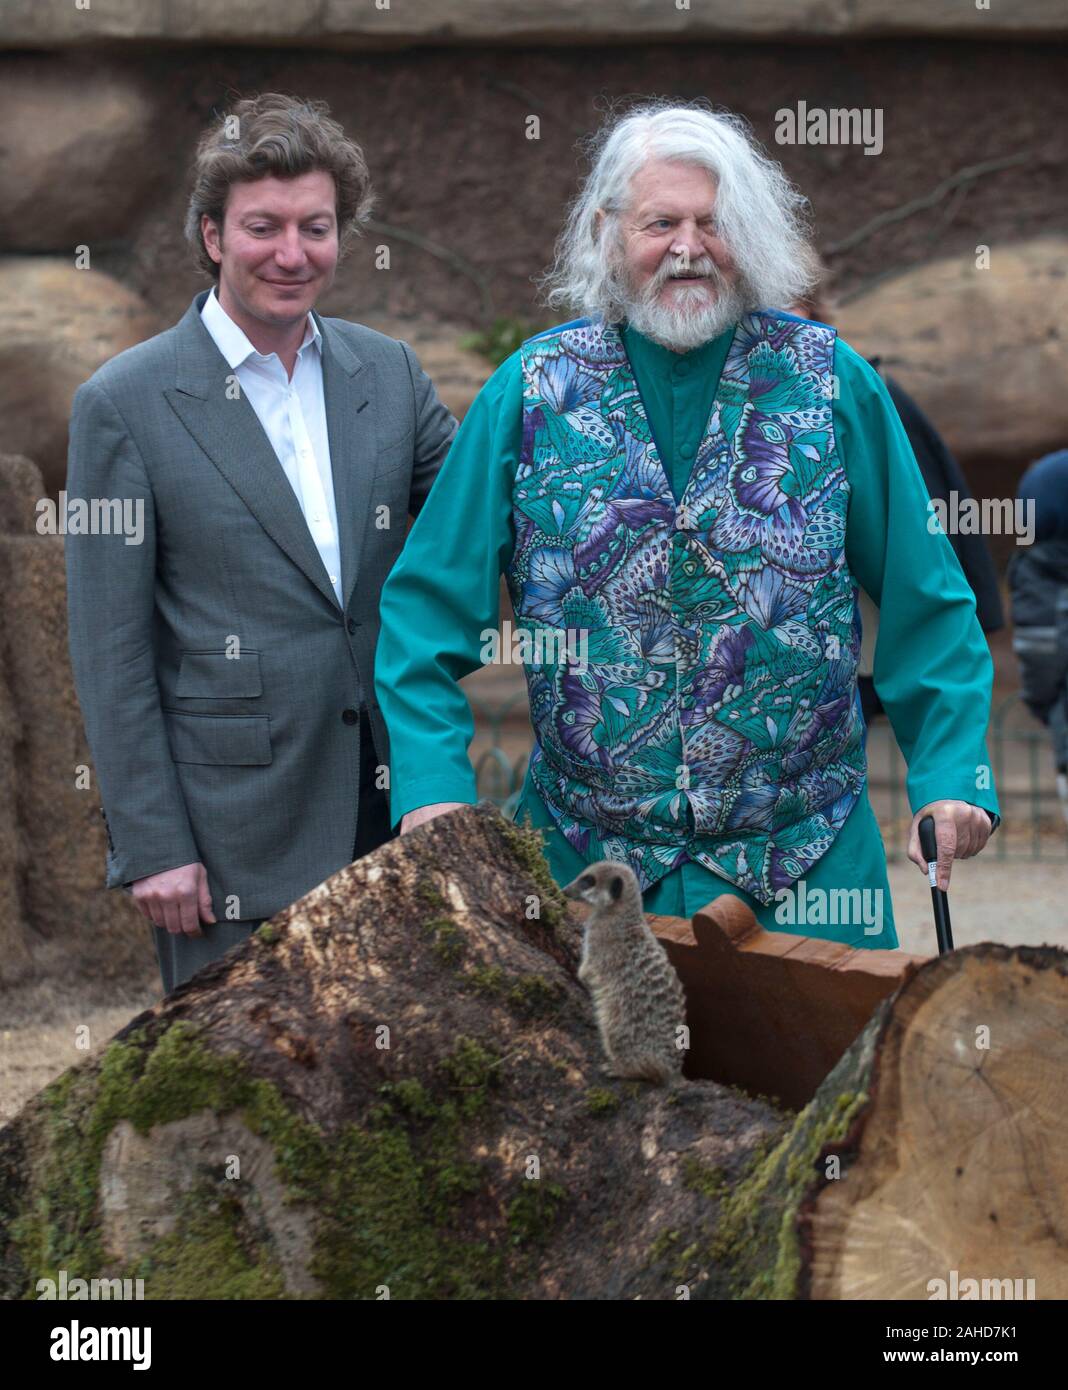 Lord Bath and his son Viscount Weymouth opening the Elephant Sanctuary for 'Anne' at Longleat Safari Park in Wiltshire. Stock Photo